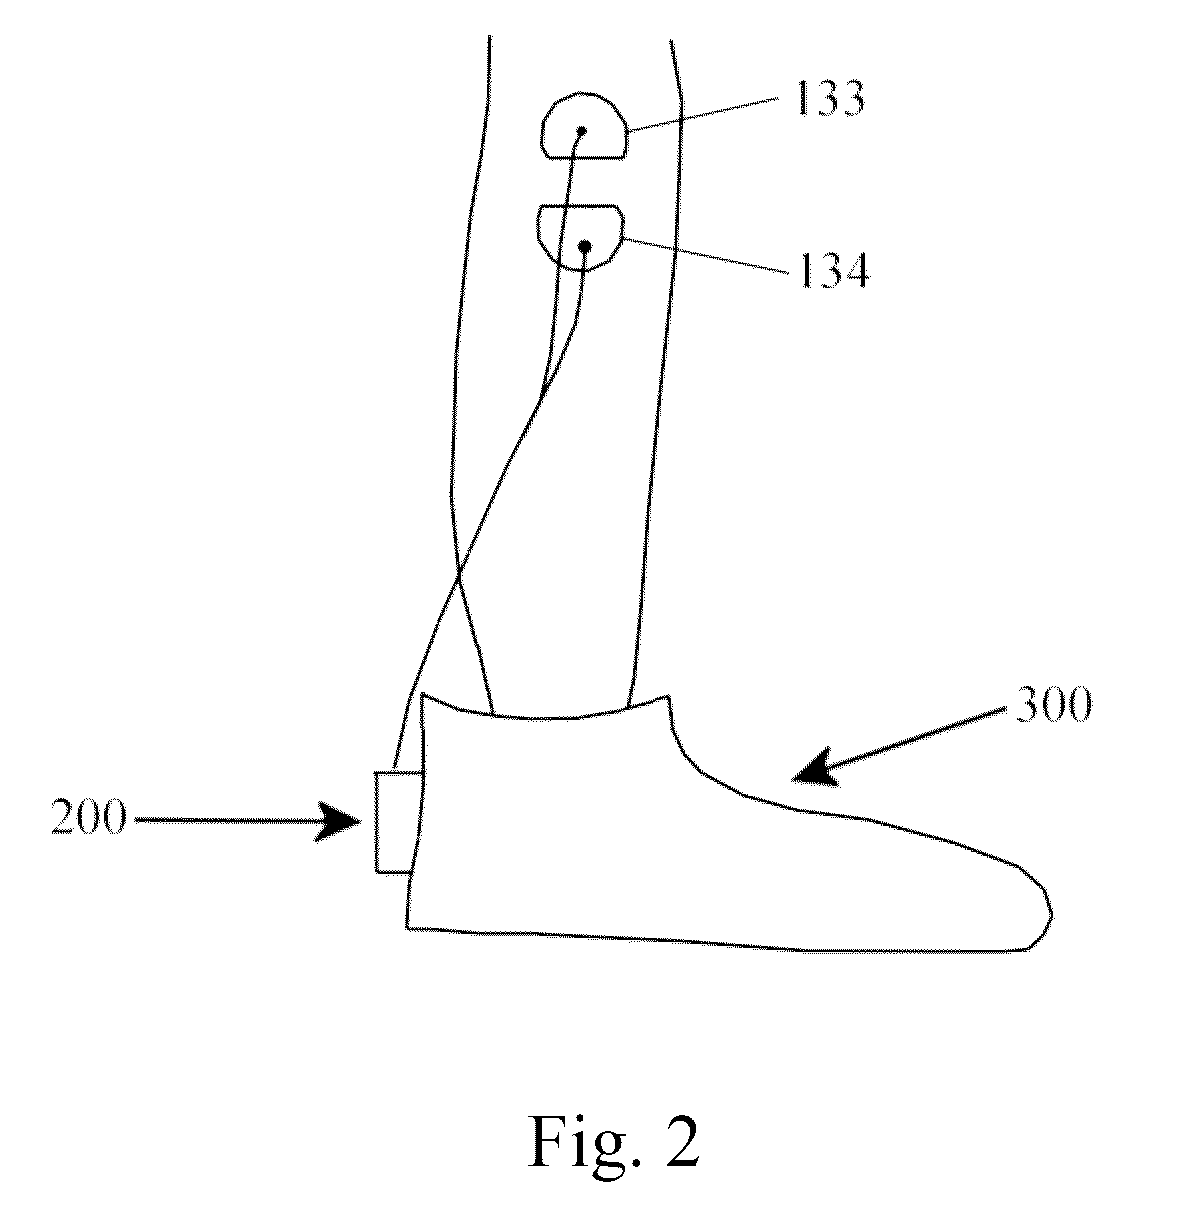 Methods and devices for preventing ankle sprain injuries